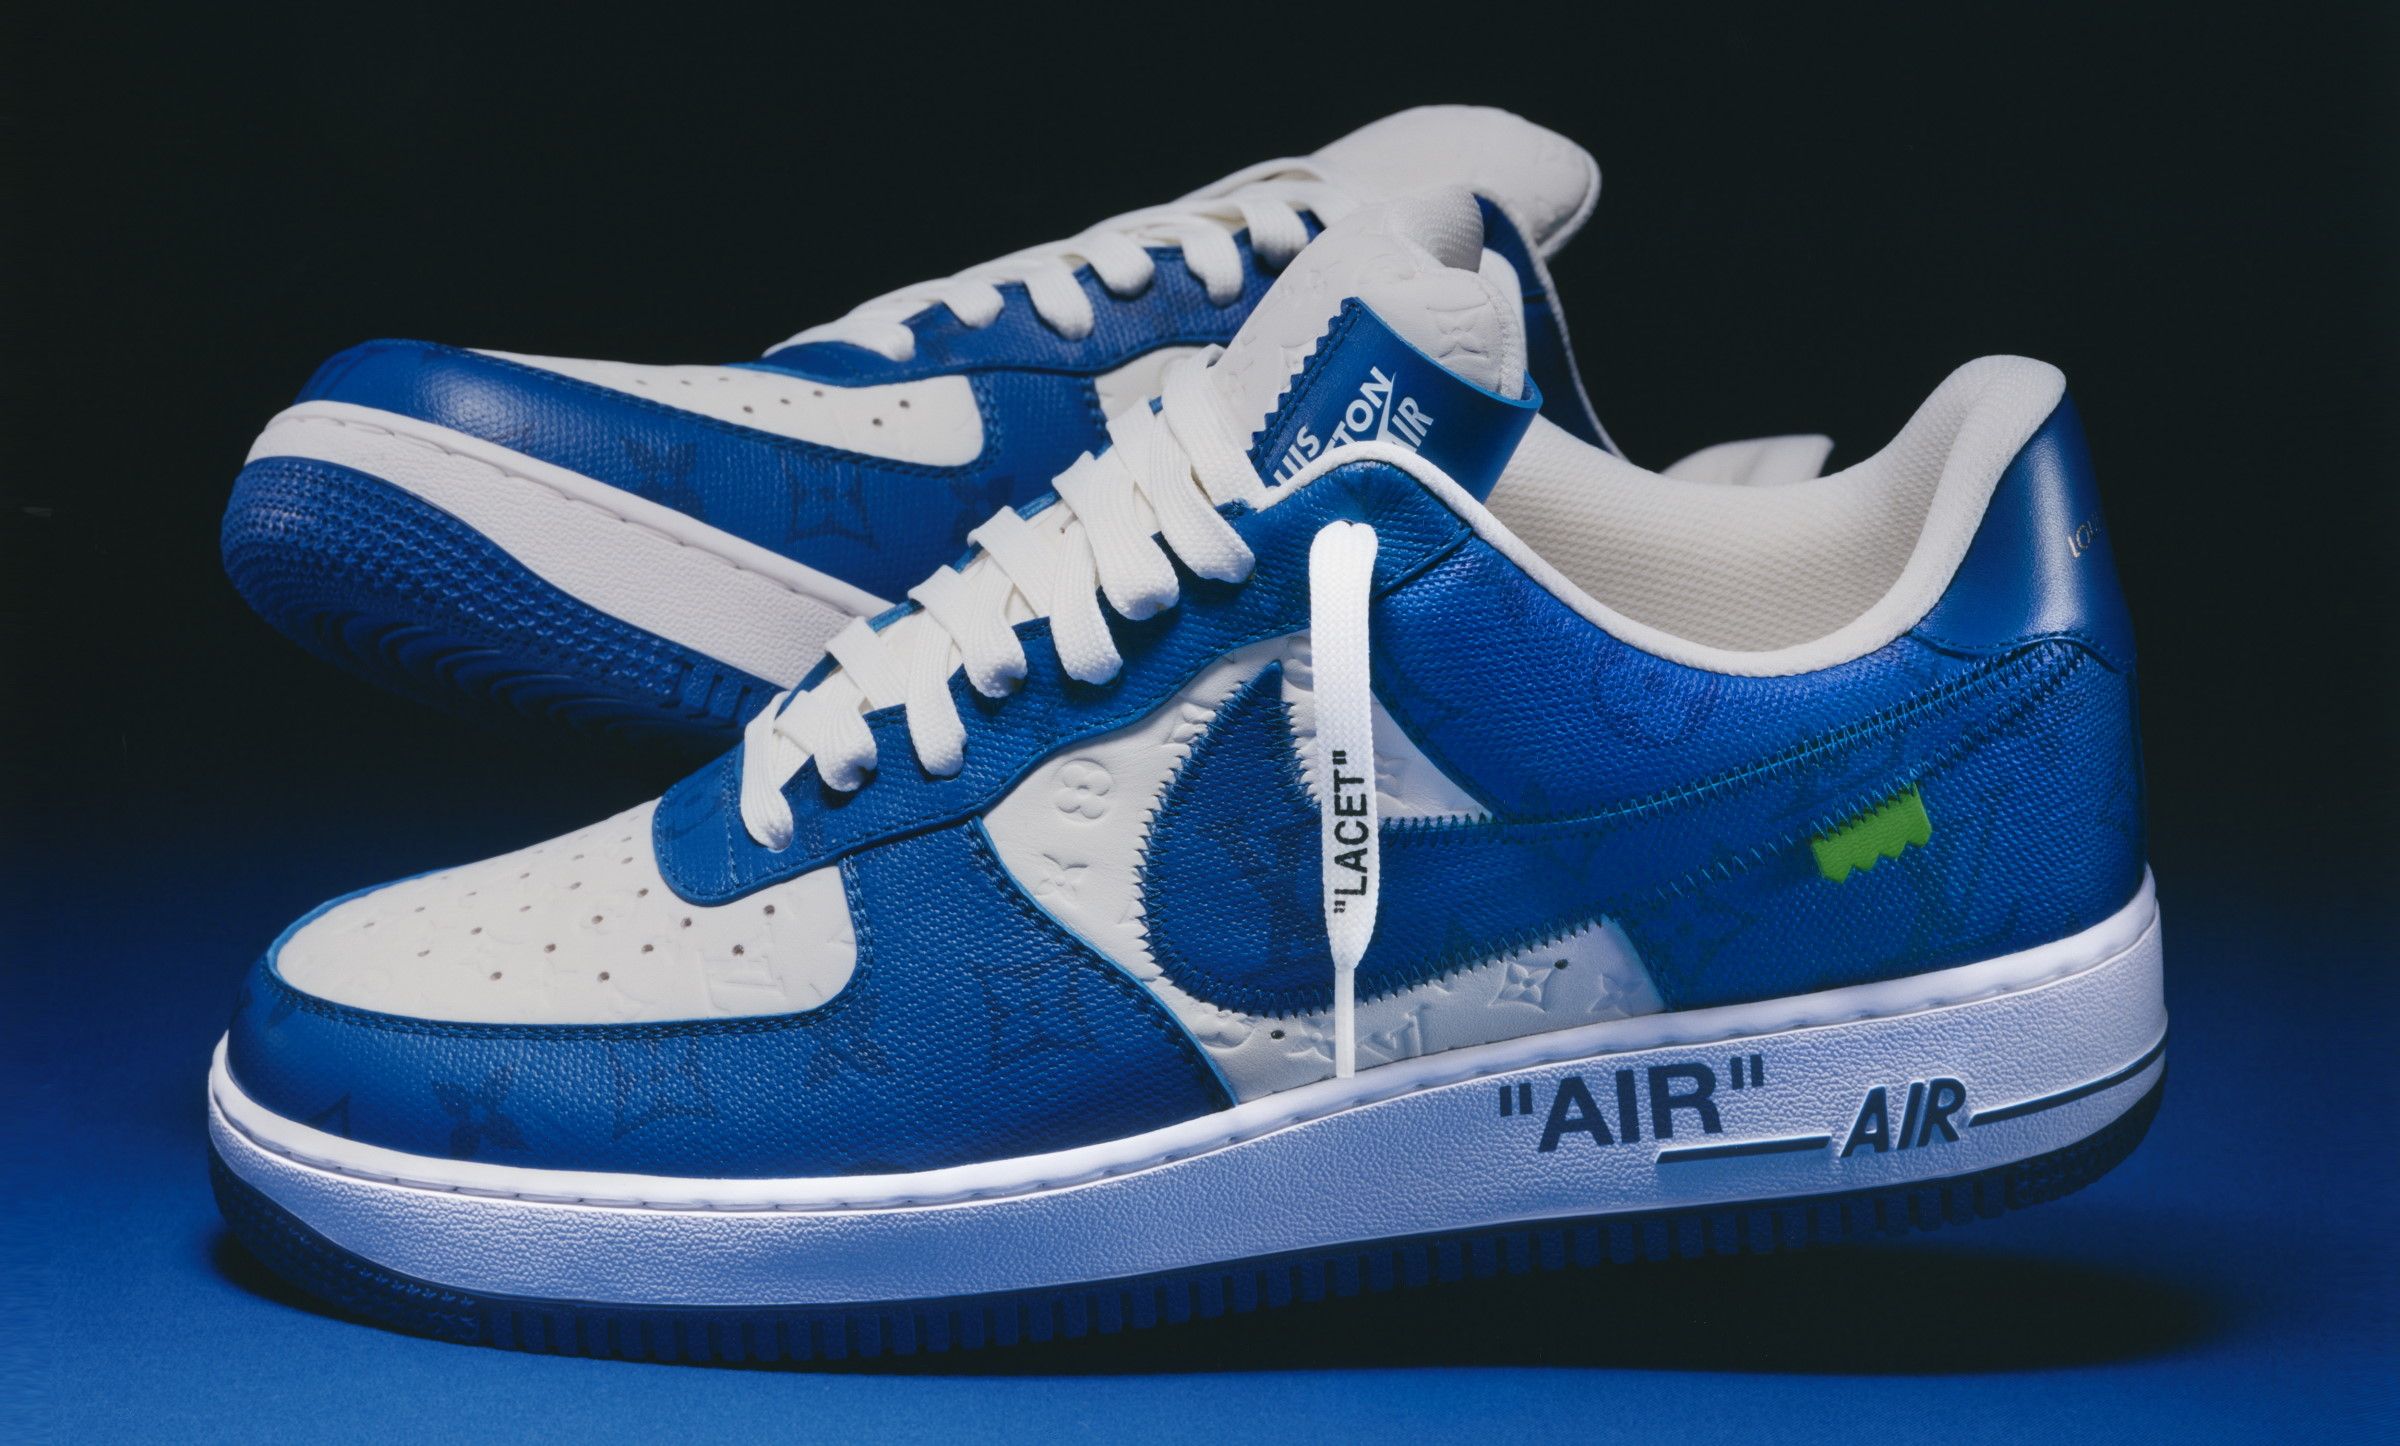 The Louis Vuitton and Nike Air Force 1 Collection Tributes Virgil